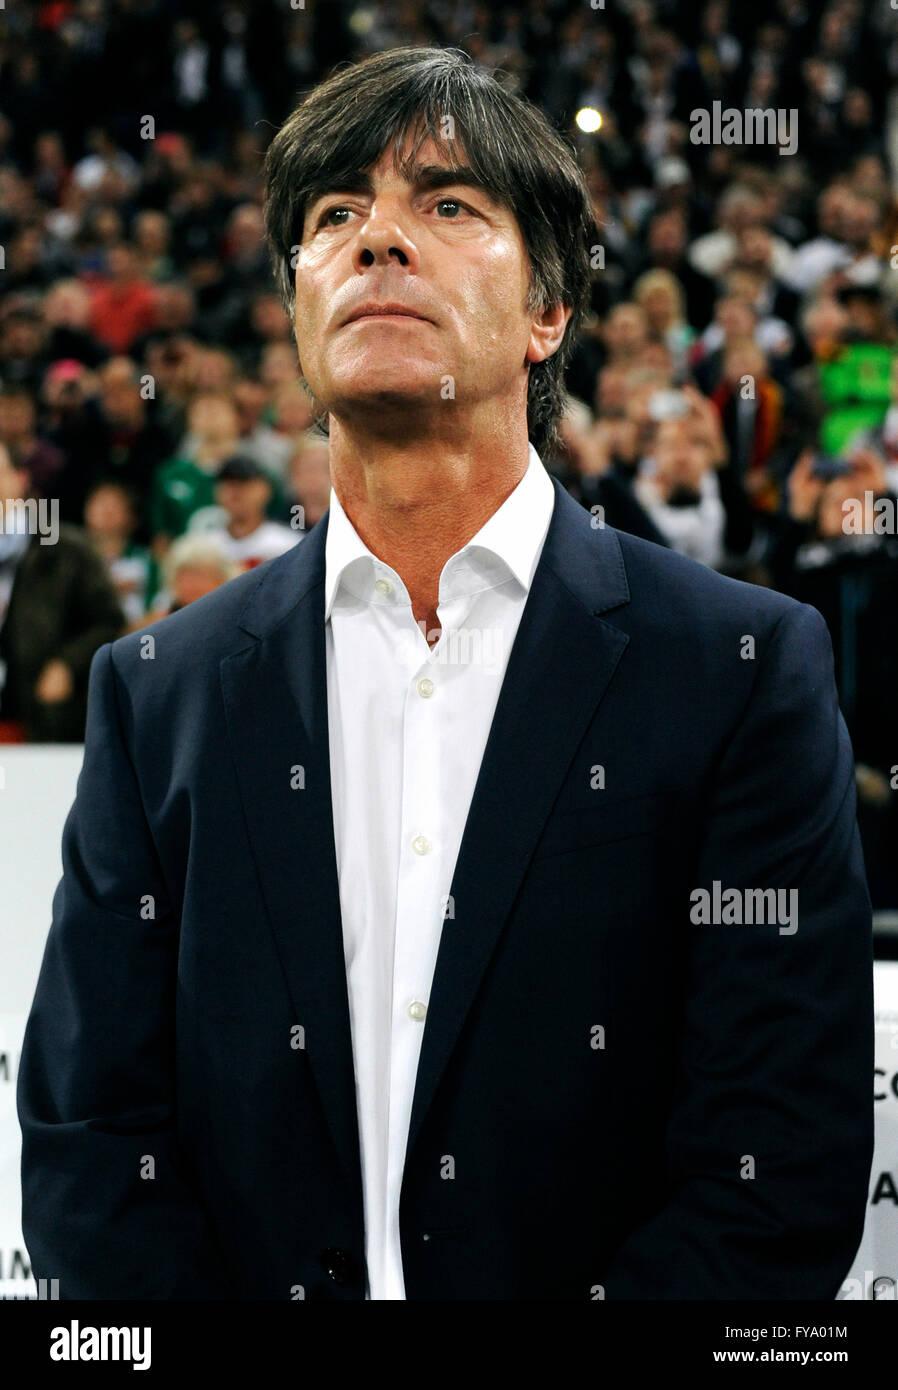 Joachim Löw, GER, manager of the German national football team, qualifying game for the UEFA Euro 2016, Germany 1 - Ireland 1 Stock Photo